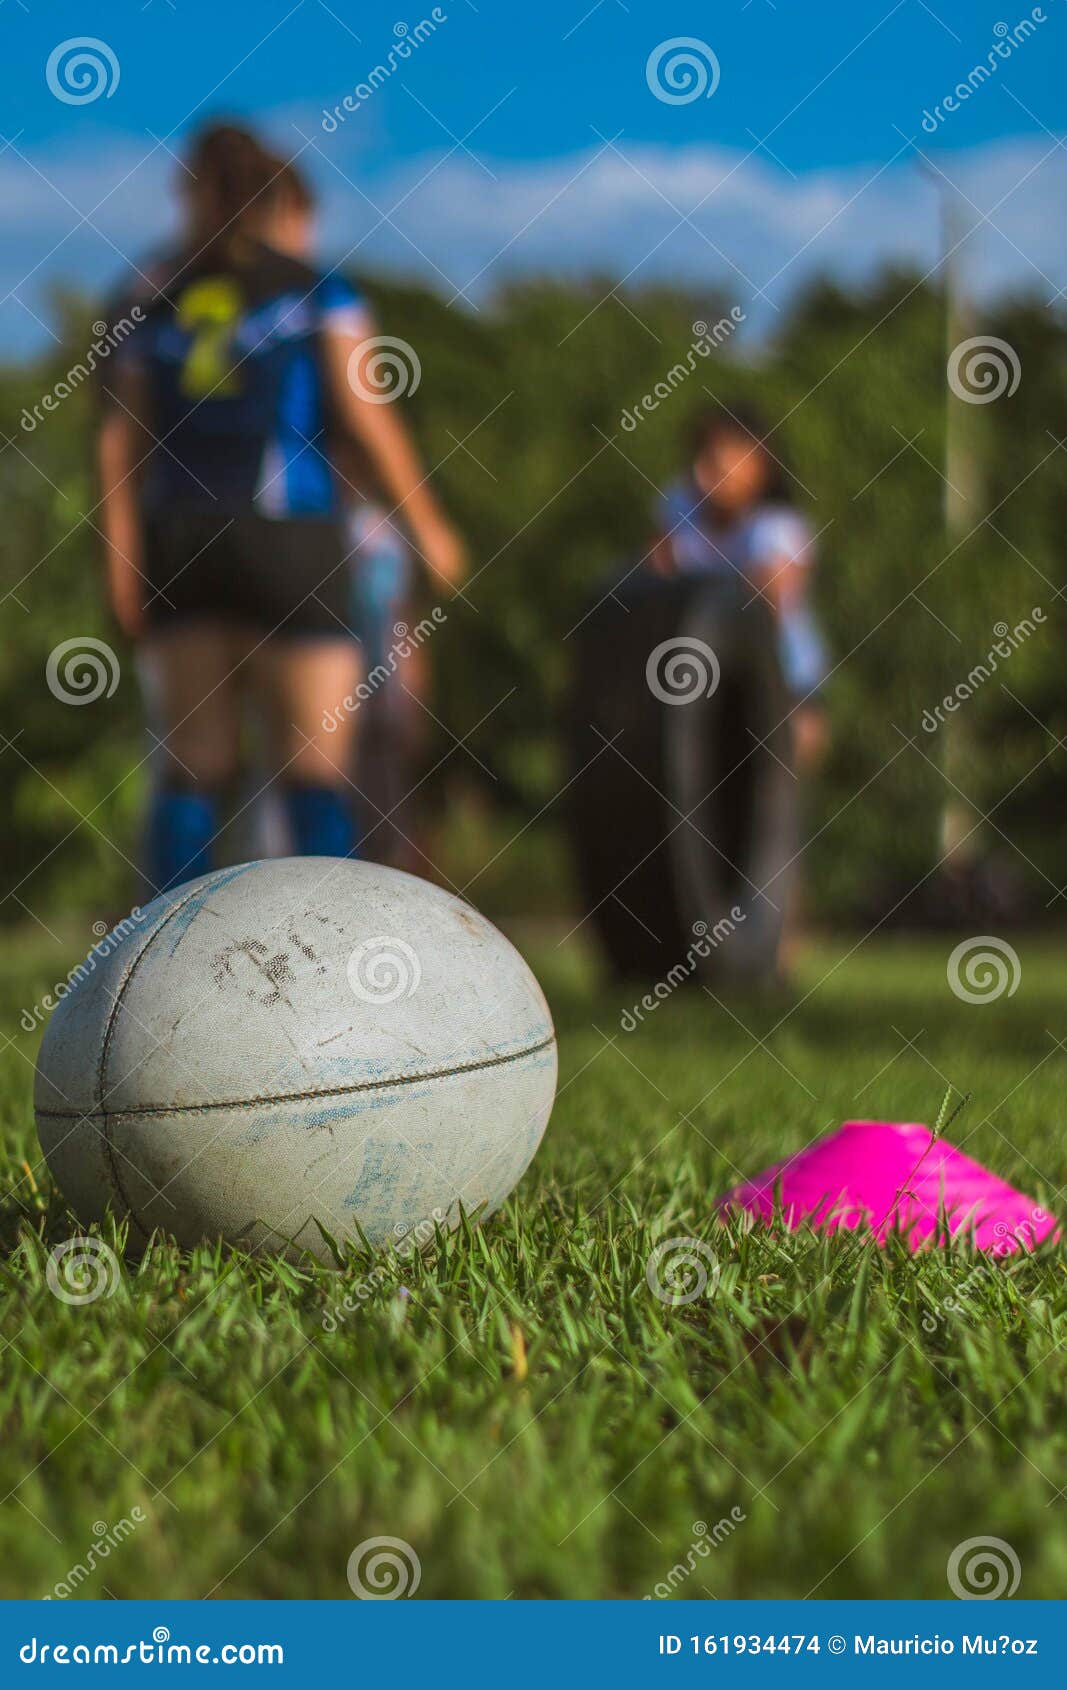 rugby is my life and pasiÃÂ³n